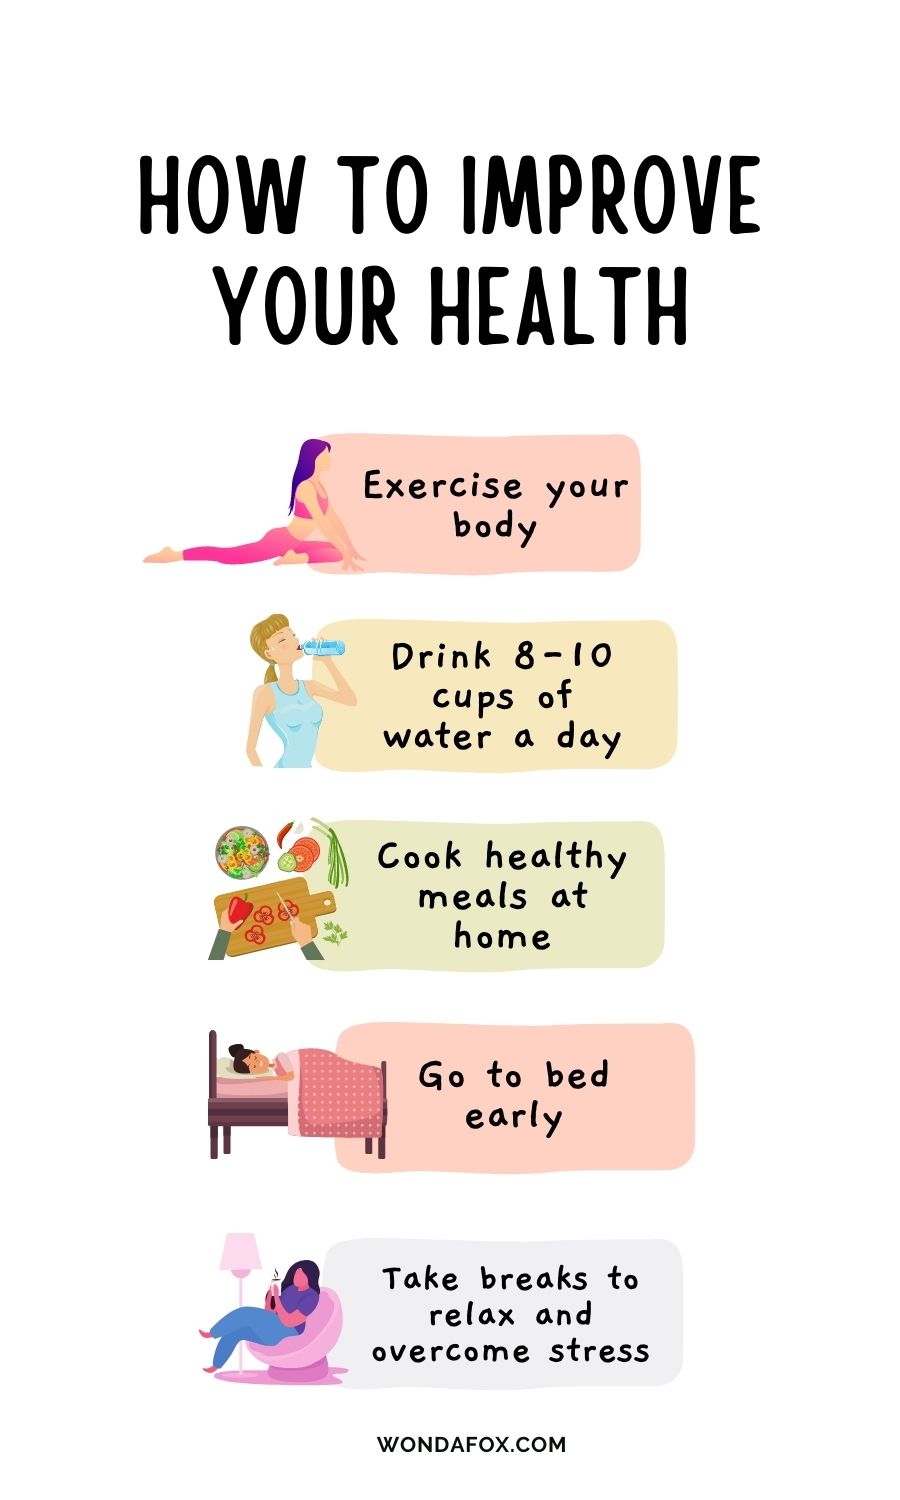 How To Improve Your Health